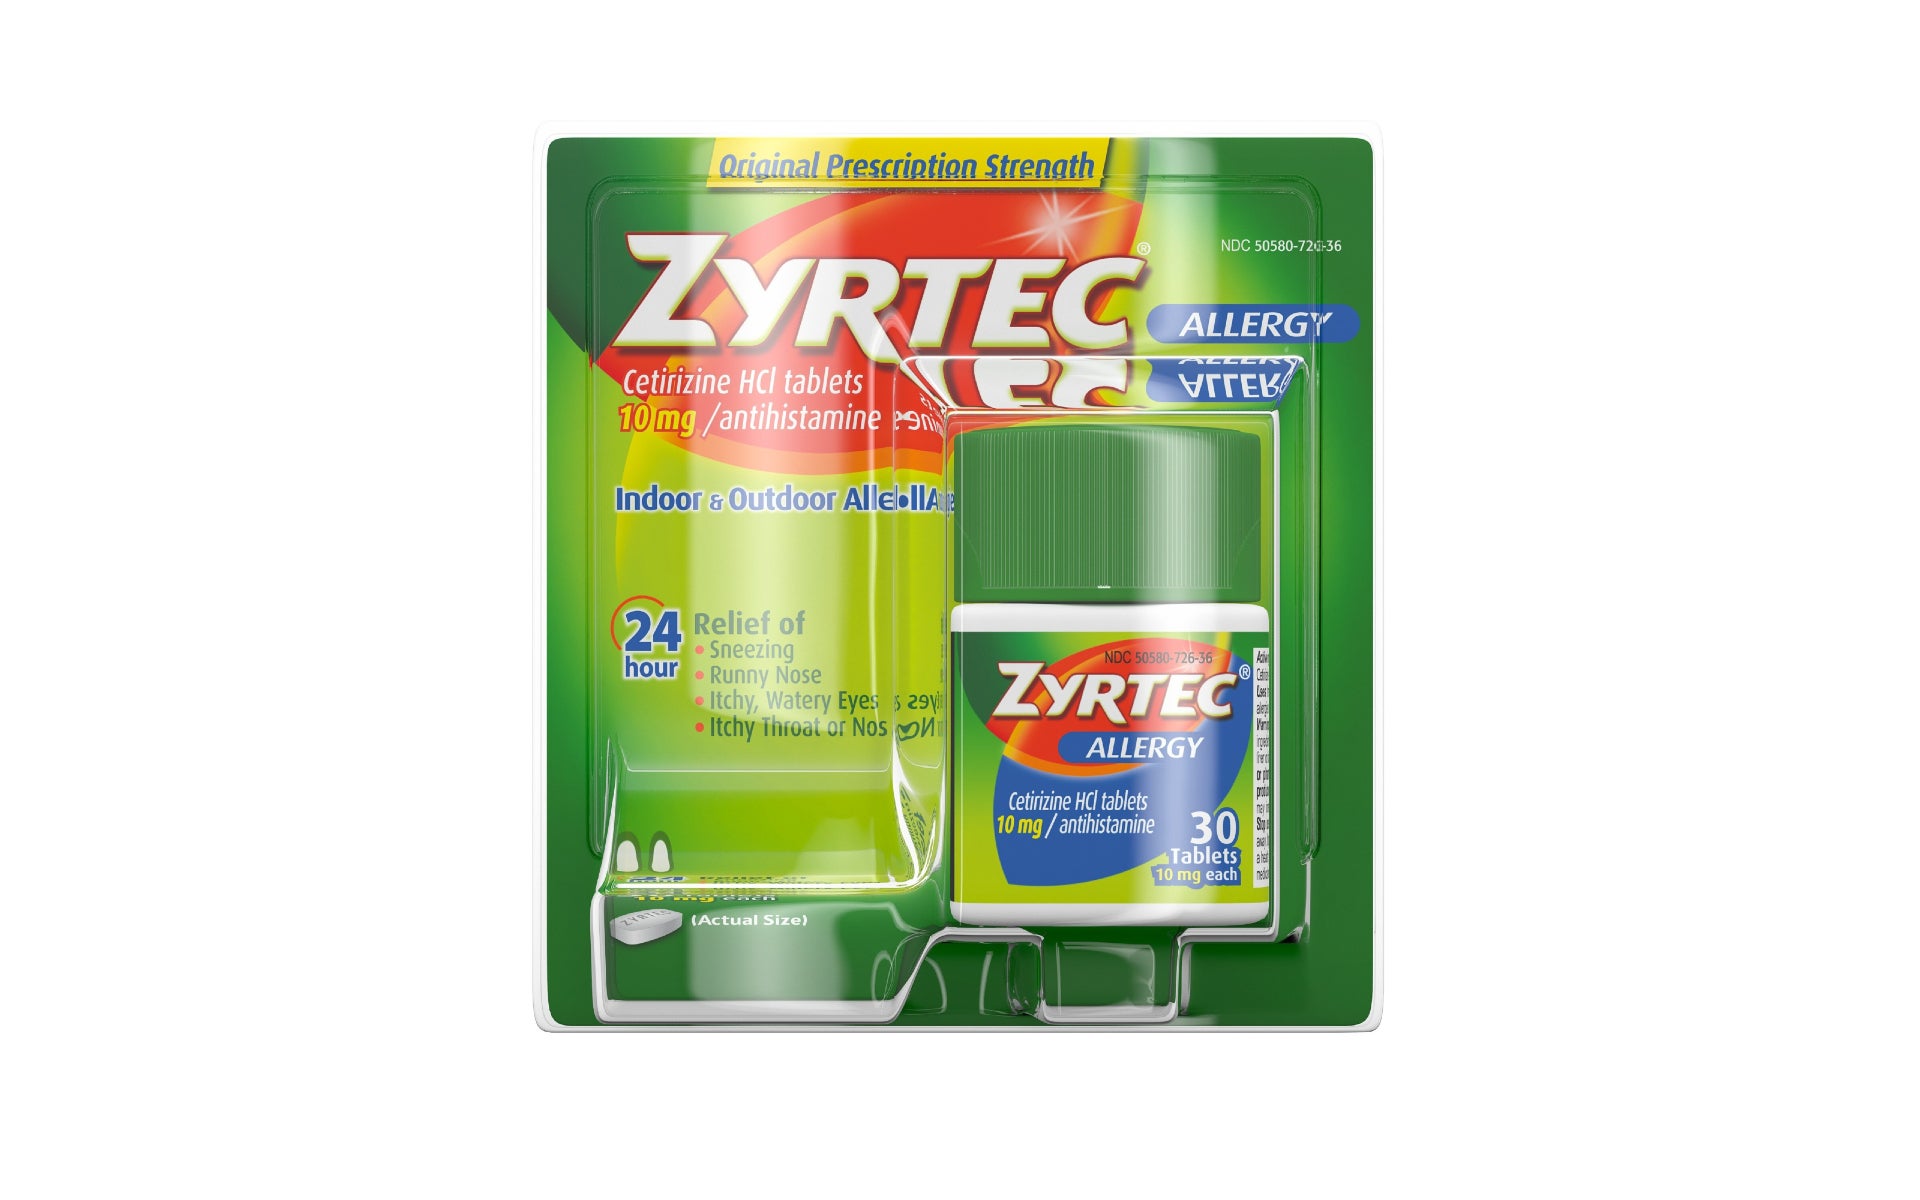 Zyrtec allergy relief tablets